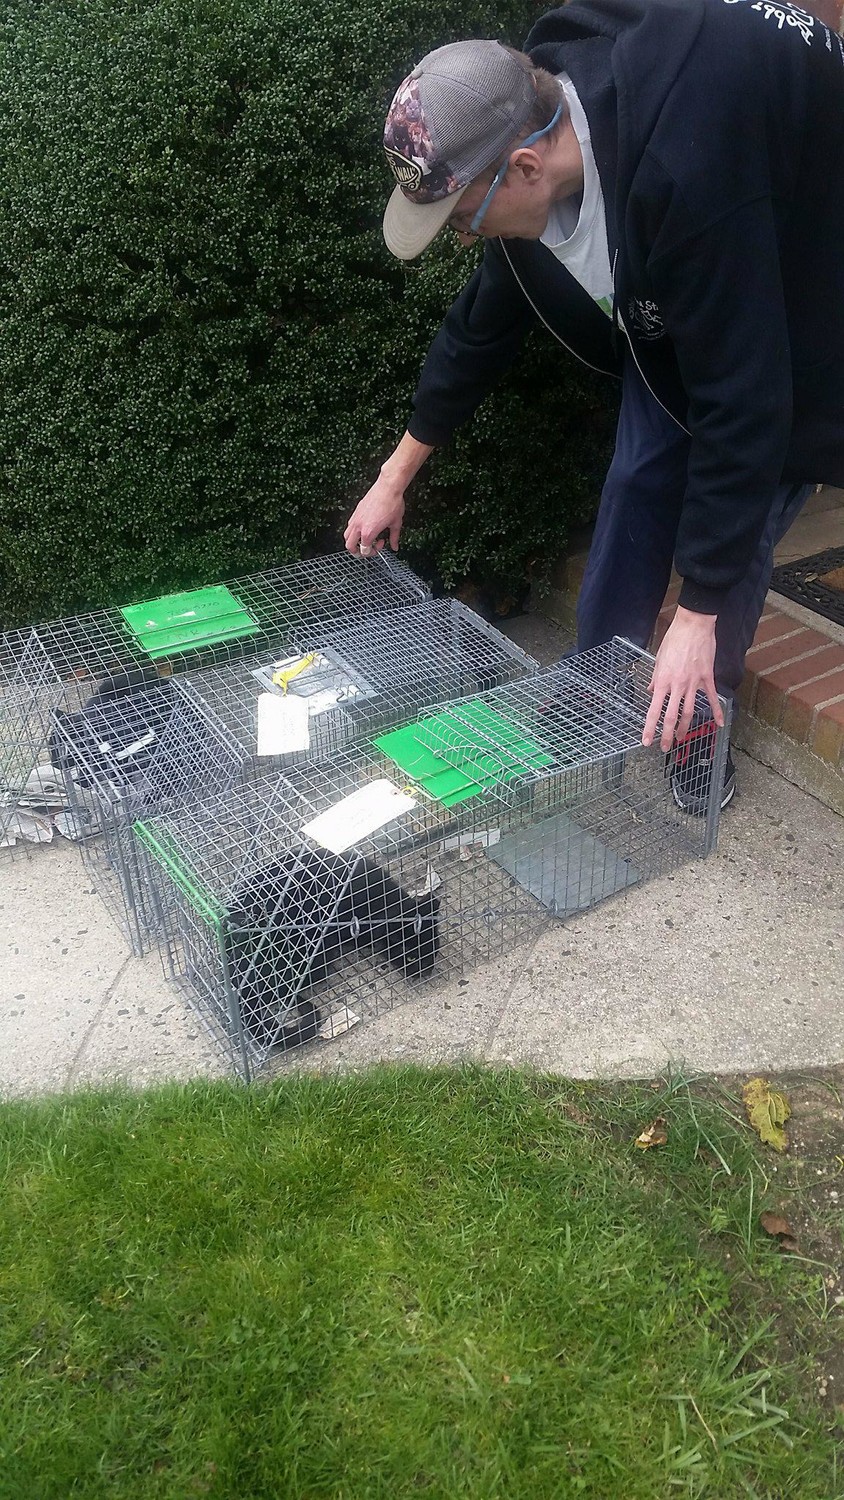 John Debacker travels around the Town of Hempstead to trap feral cats.